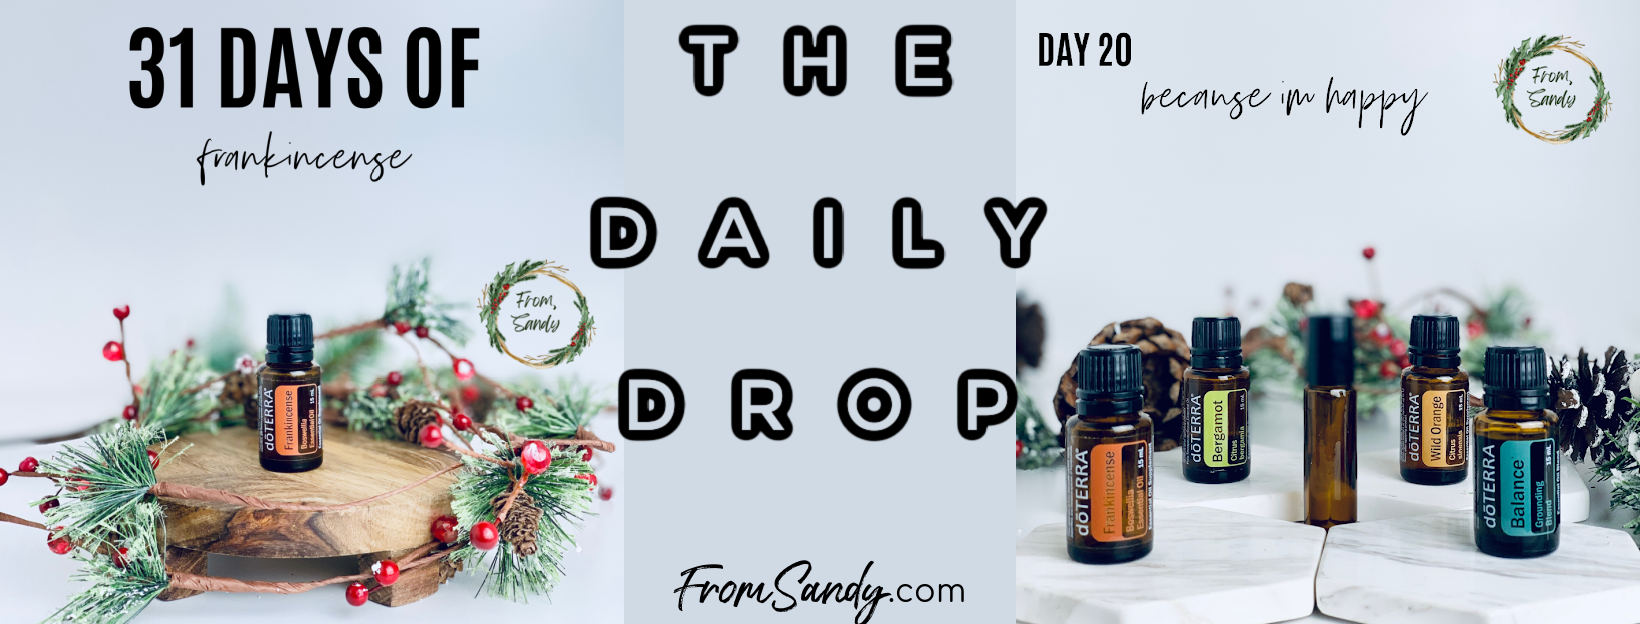 Because I'm Happy (31 Days of Frankincense: Day 20), From Sandy